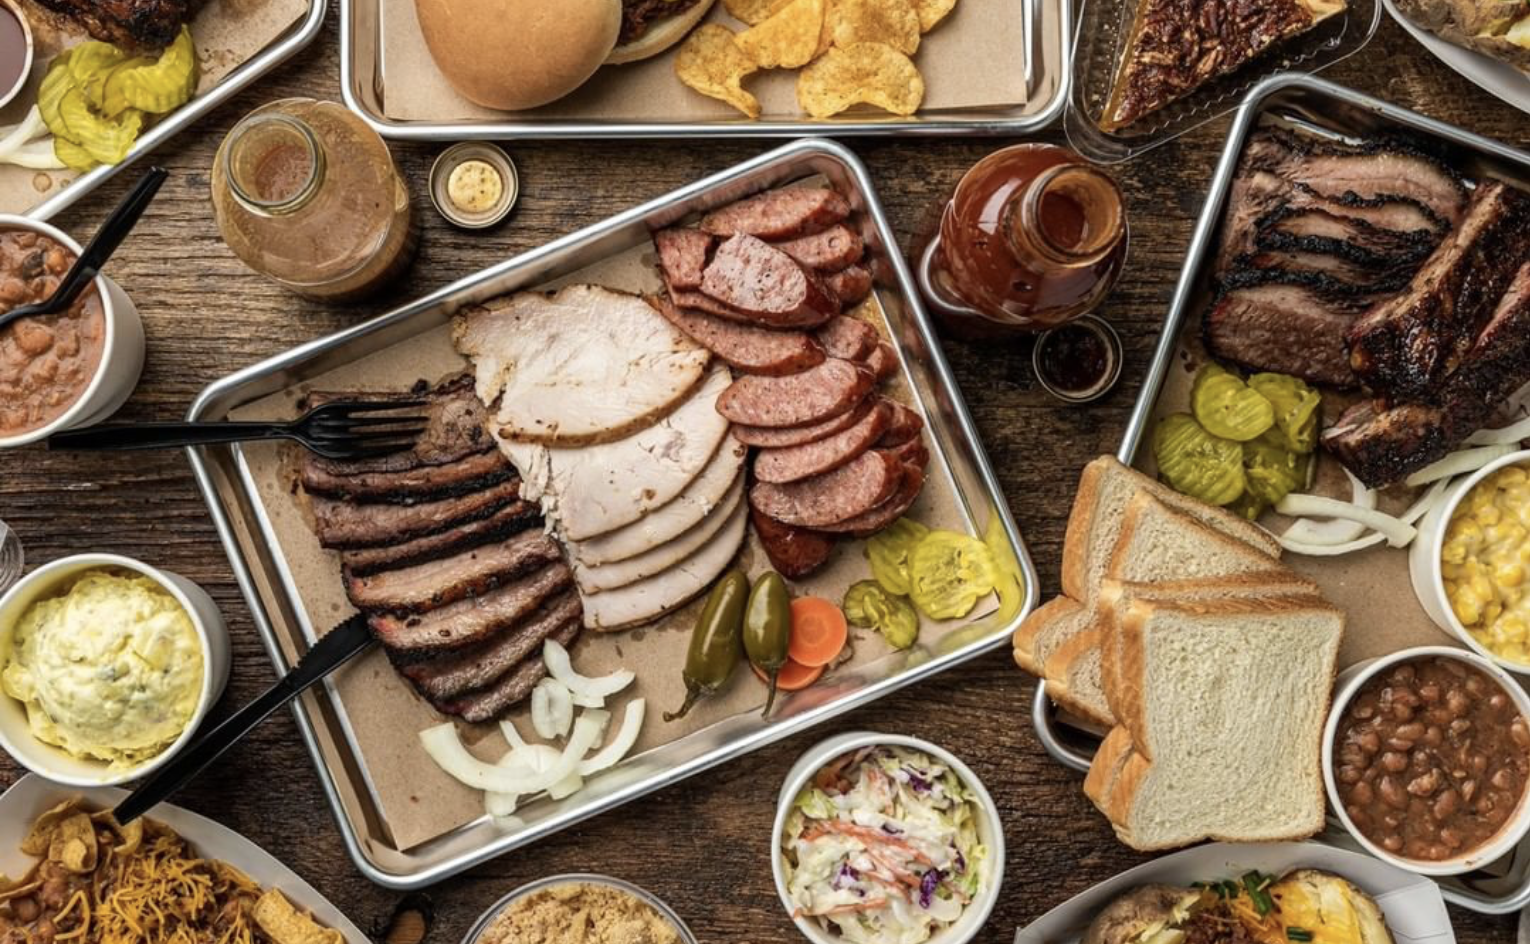 San Antonio's Smoke BBQ mini-empire expands again with plans for